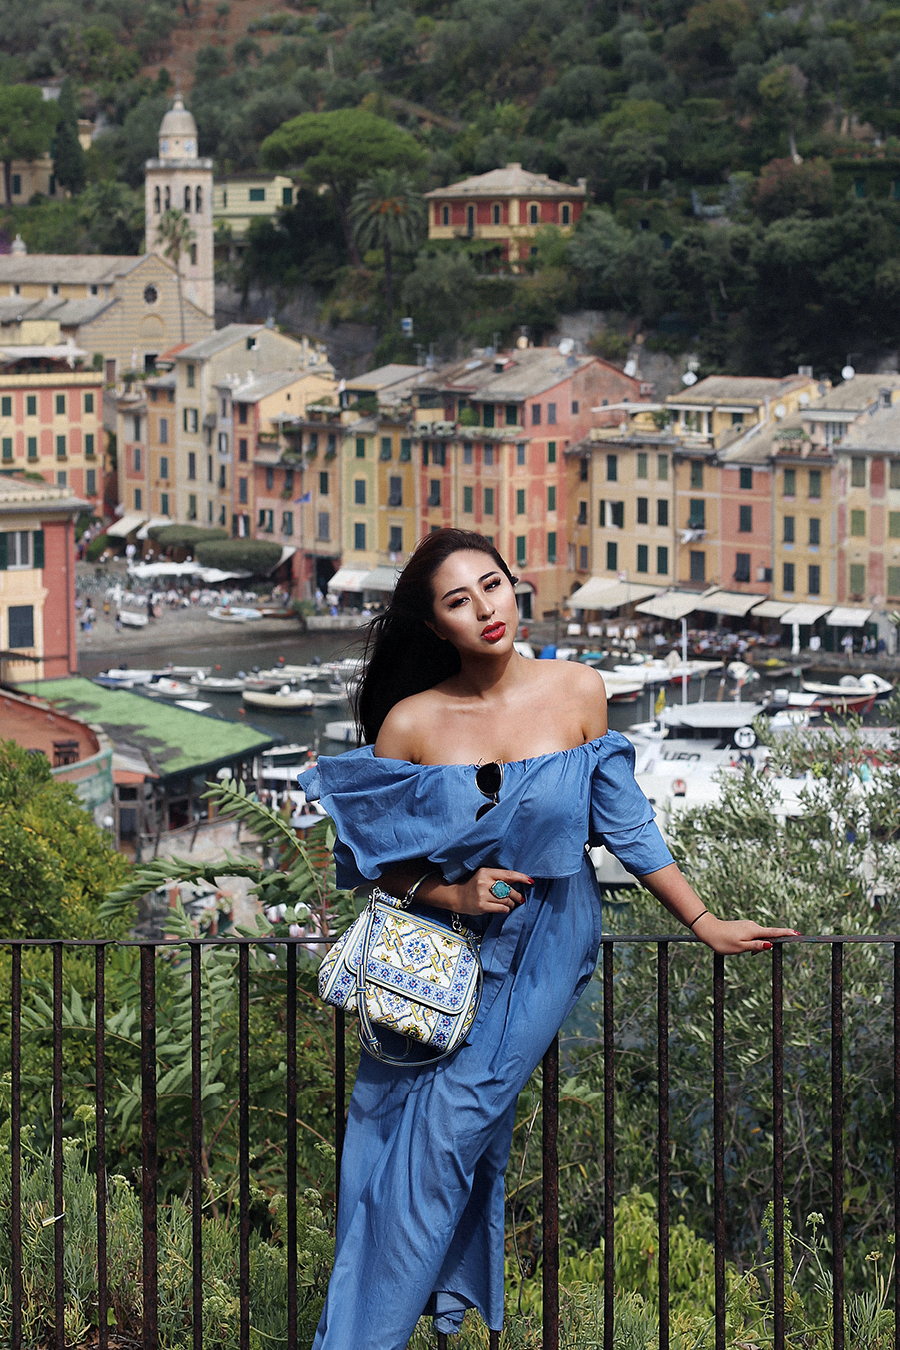 20 Days, 20 Cities, 6 Countries - The End of the Journey: Portofino, Italy